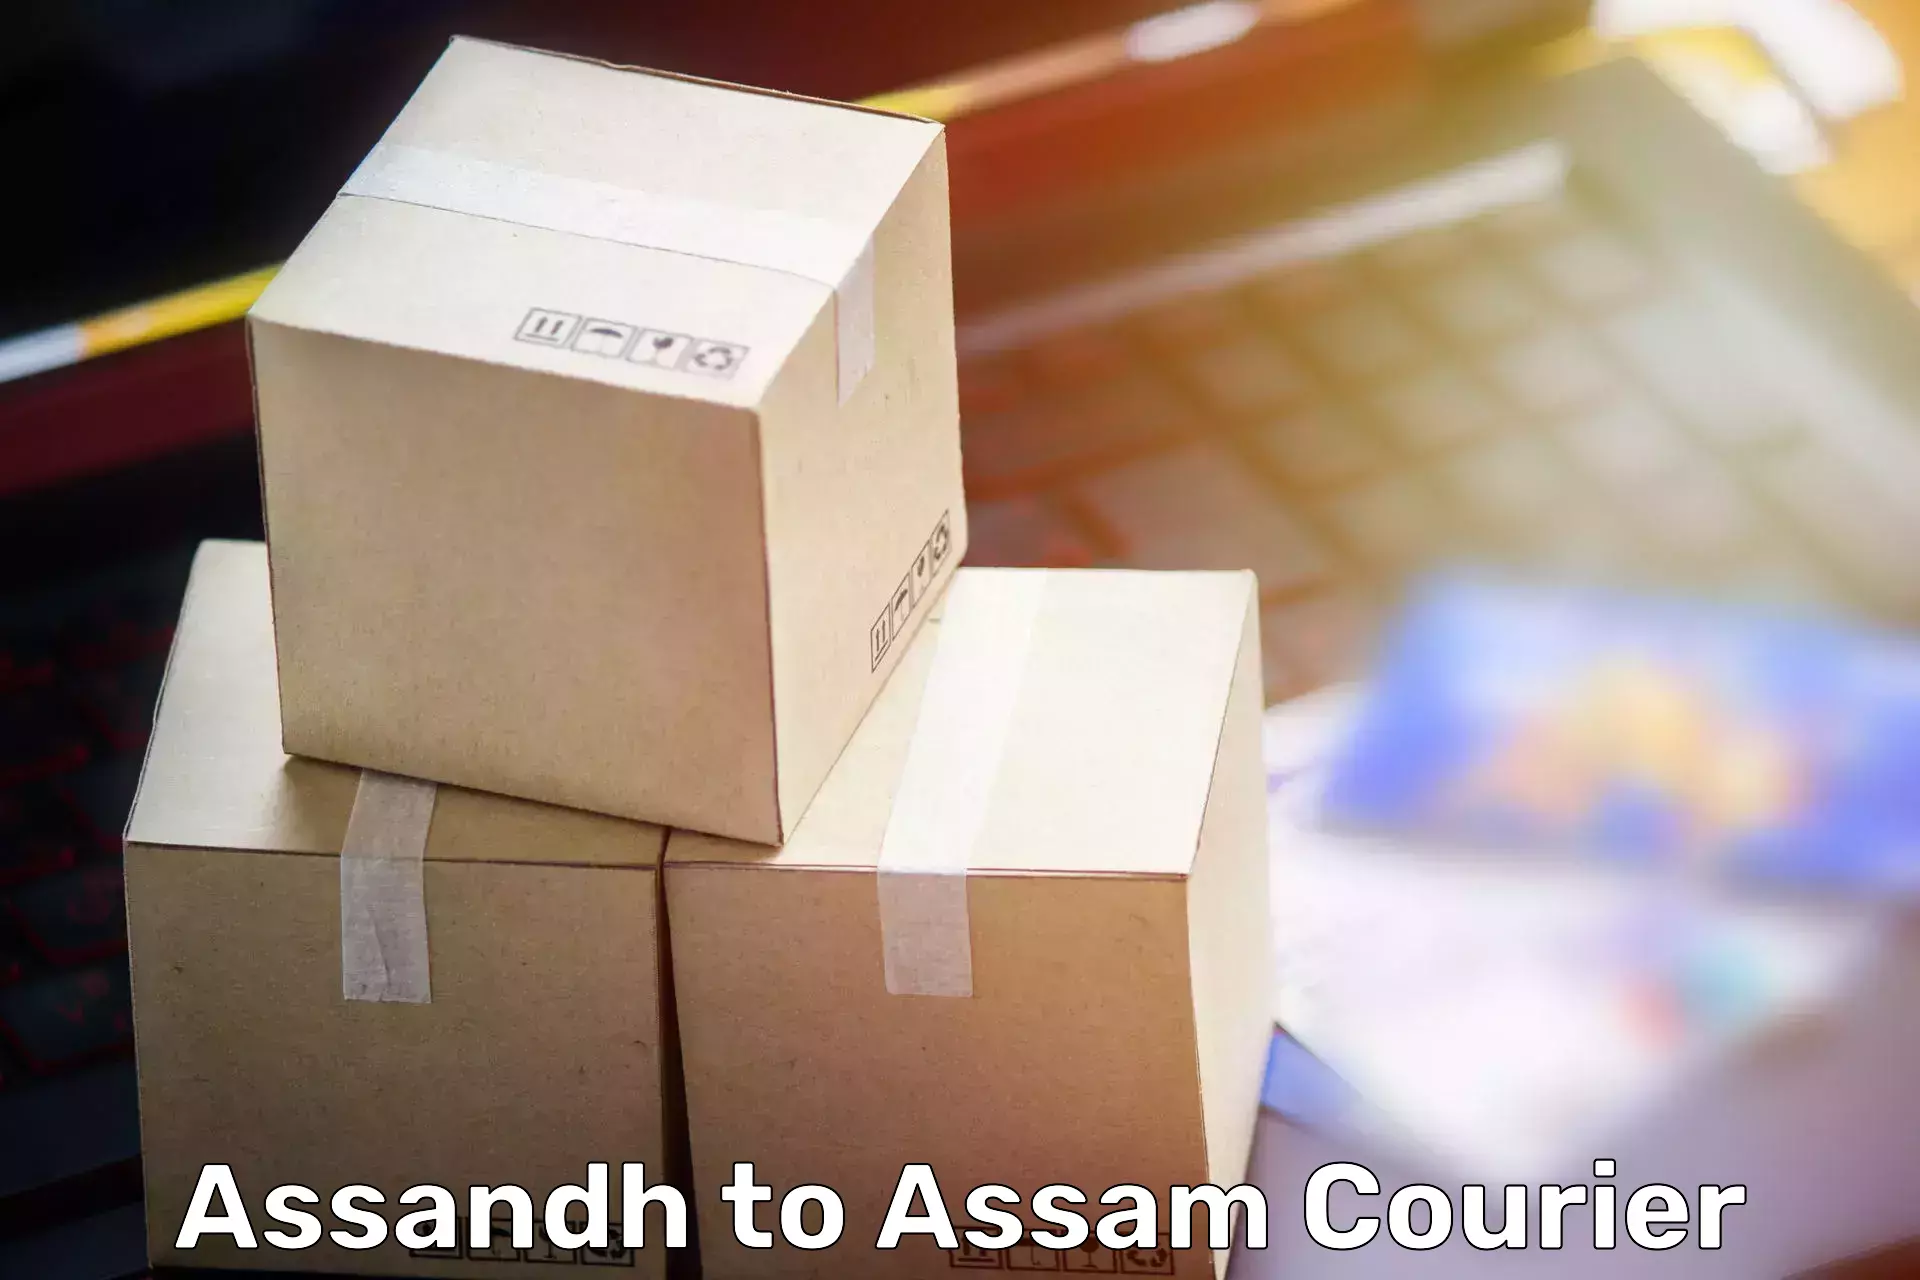 Quality relocation services Assandh to Dergaon